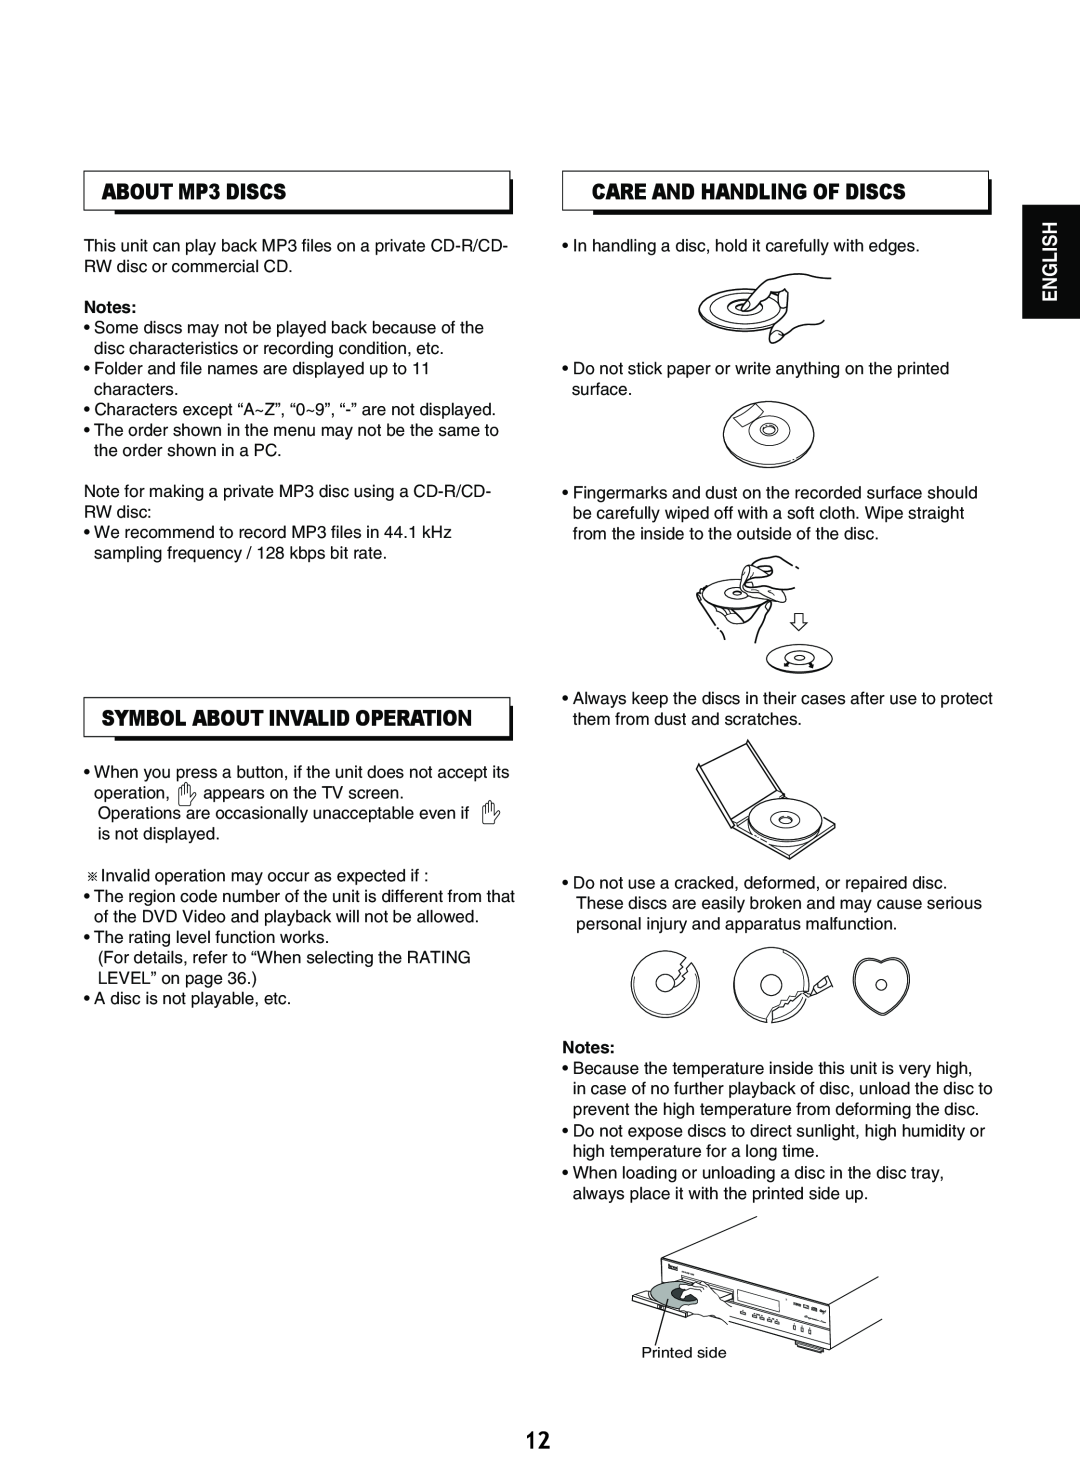 Sherwood V-903 manual ABOUT MP3 DISCS, Care And Handling Of Discs, Symbol About Invalid Operation, English 